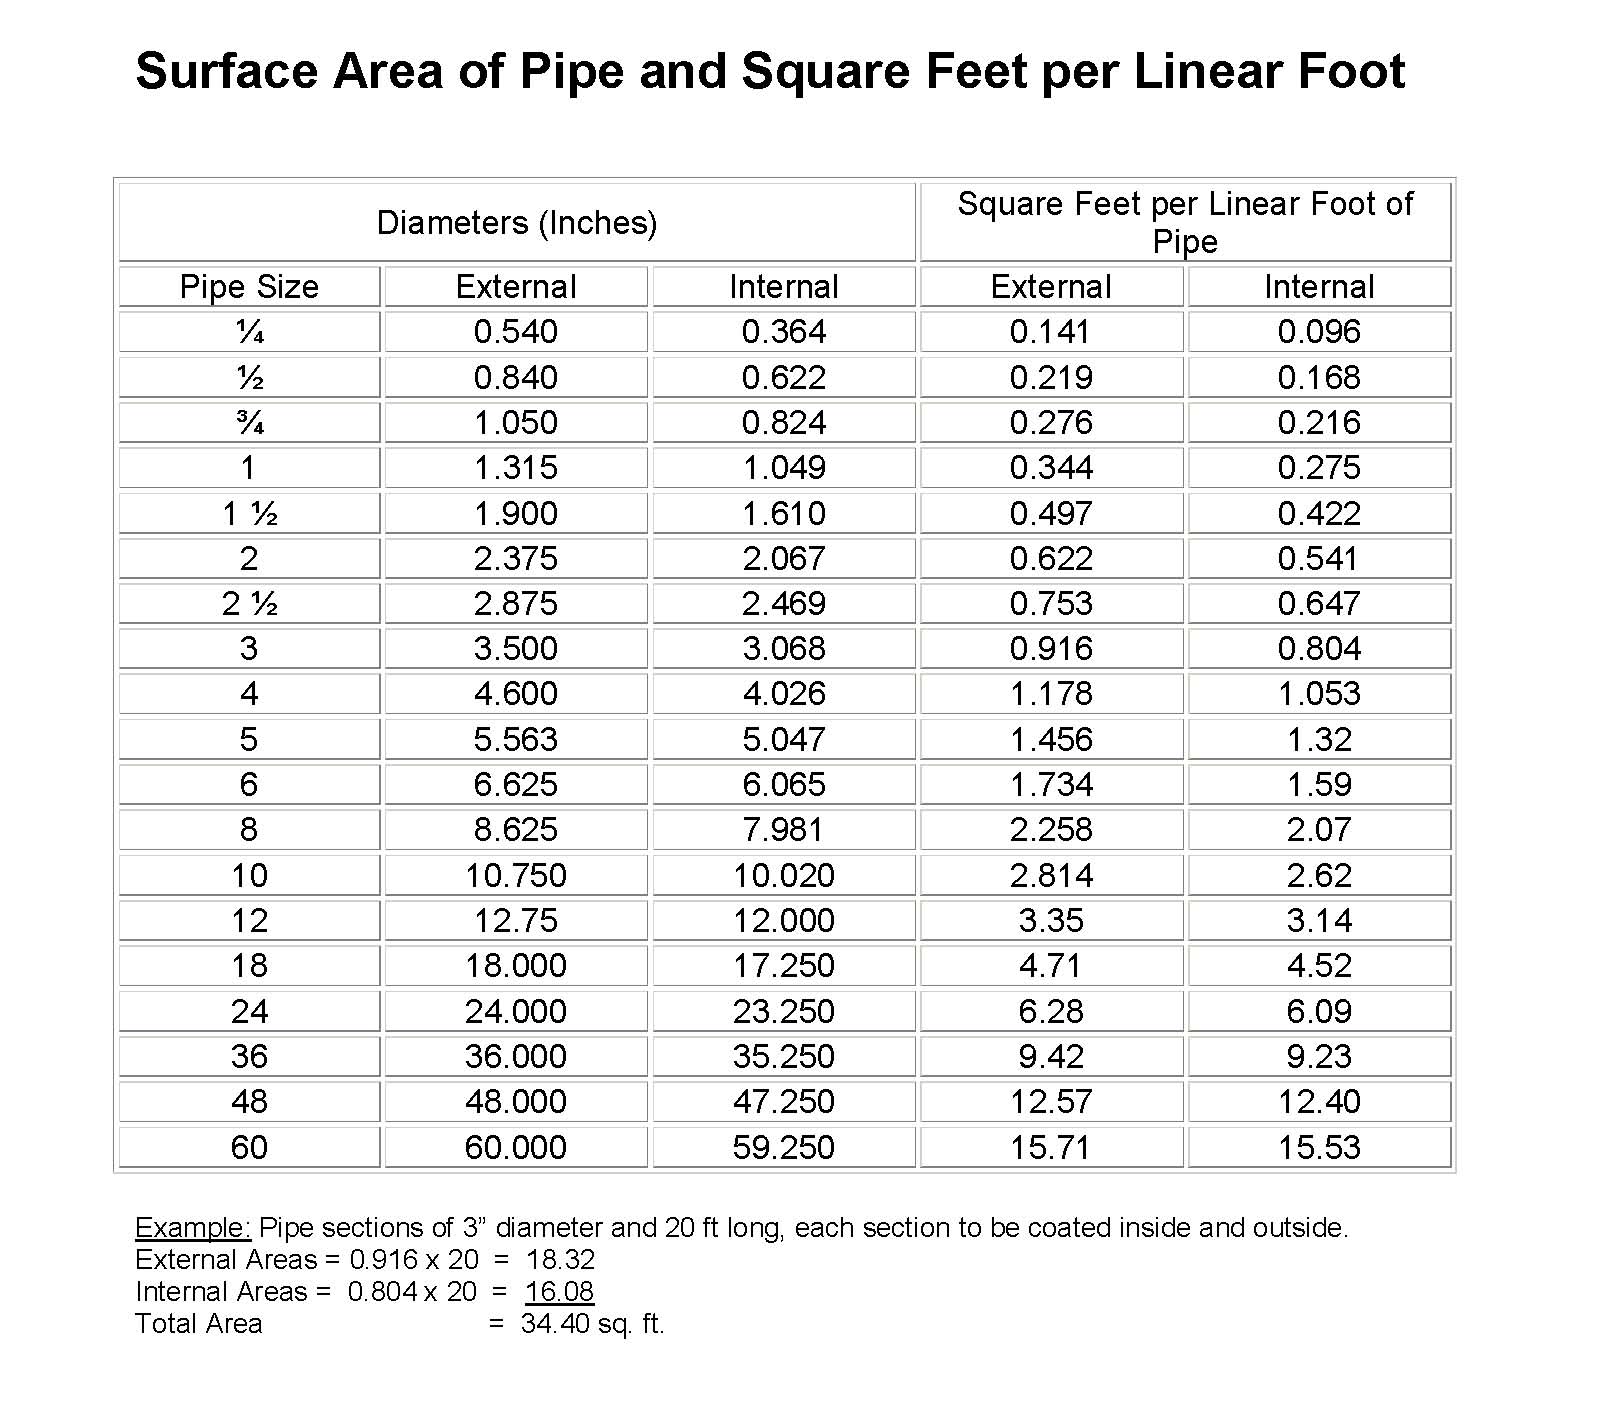 Pipe Insulation Thickness Chart